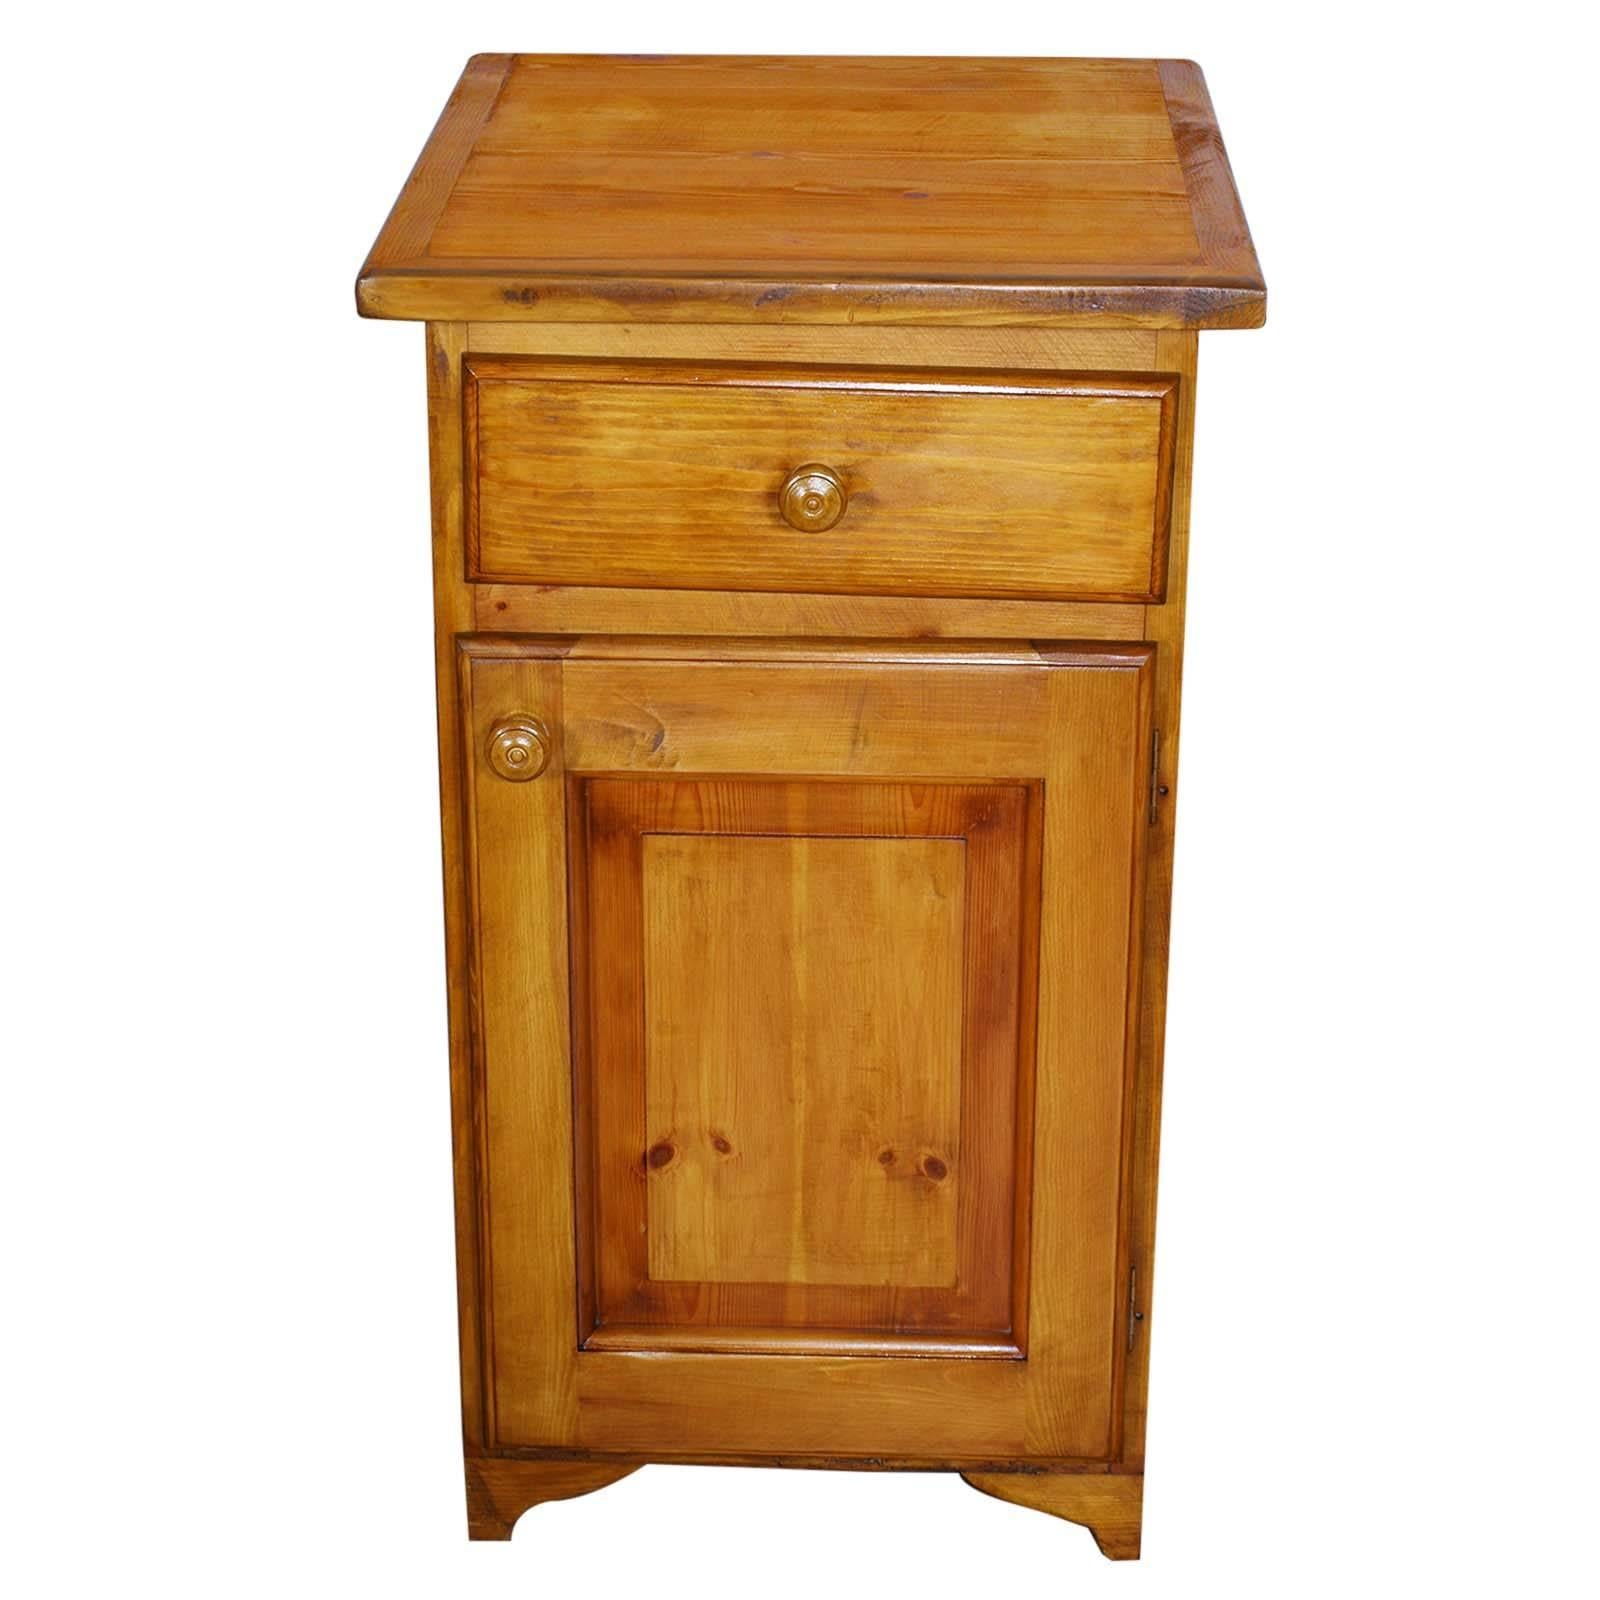 Late 19th century Austrian country rustic cabinet nightstand, solid larch, restored and polished to wax

Measure cm: H 88, W 52, D 60.
 